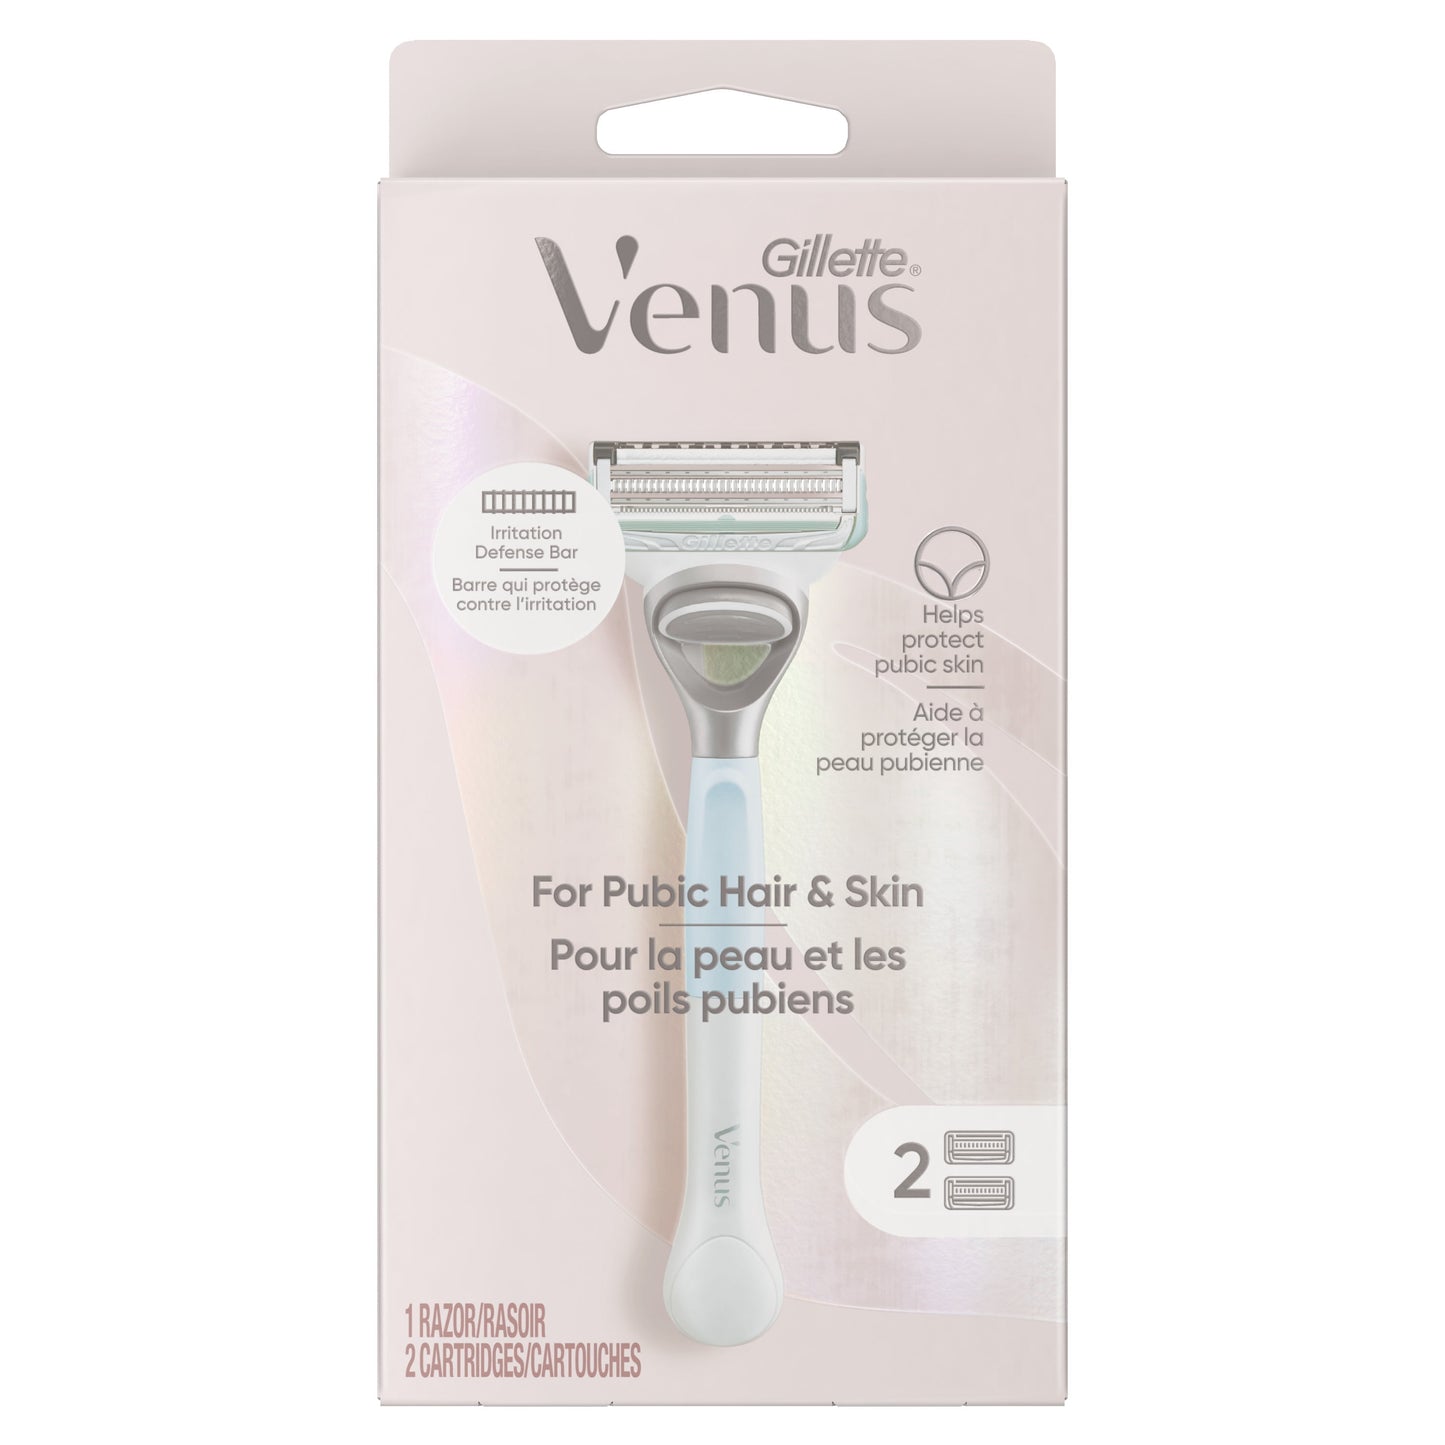 Gillette Venus for Pubic Hair and Skin, Women's Razor Handle and 2 Blade Refills